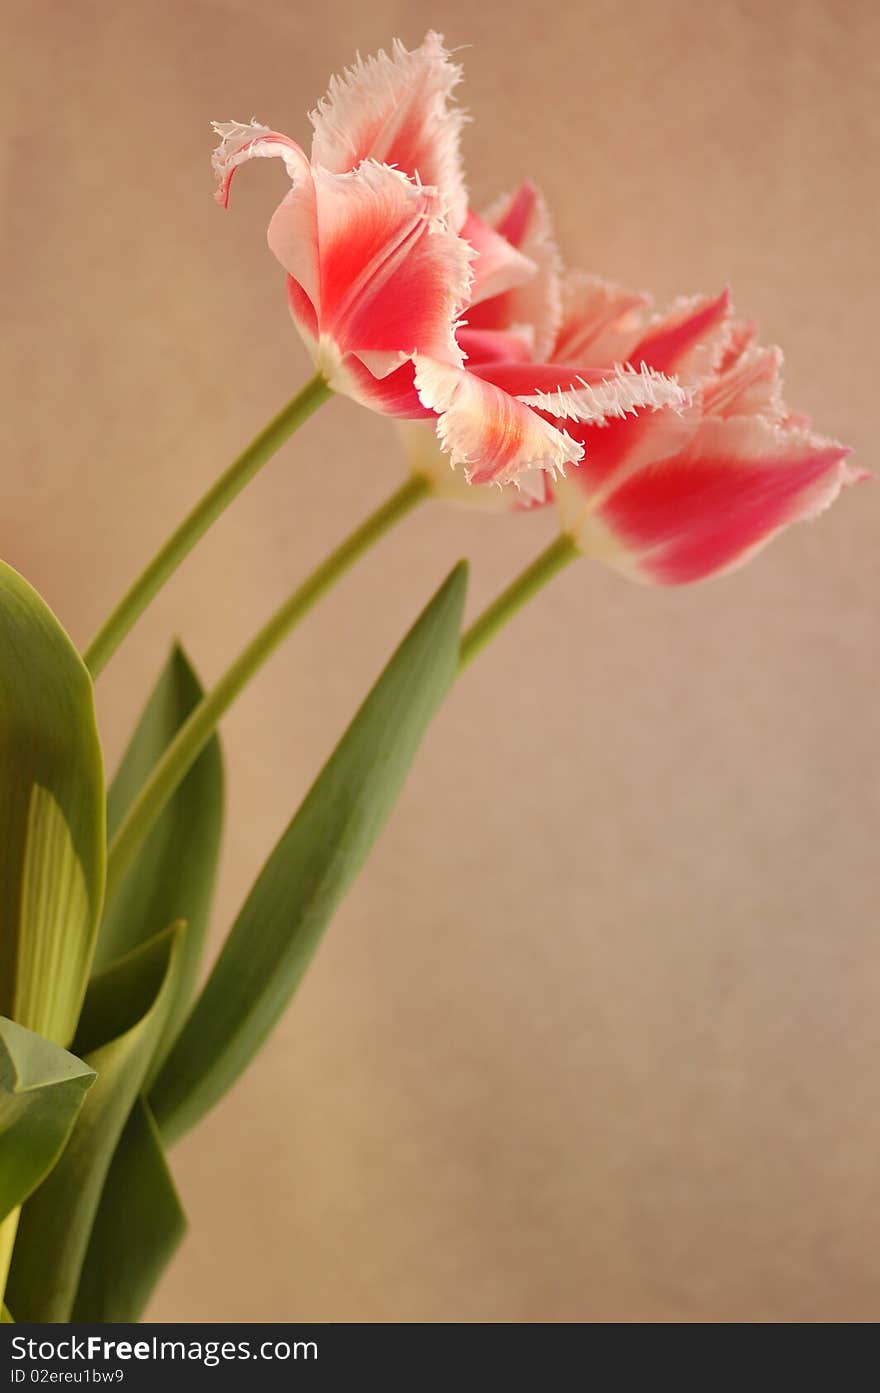 Three red tulips on a light background